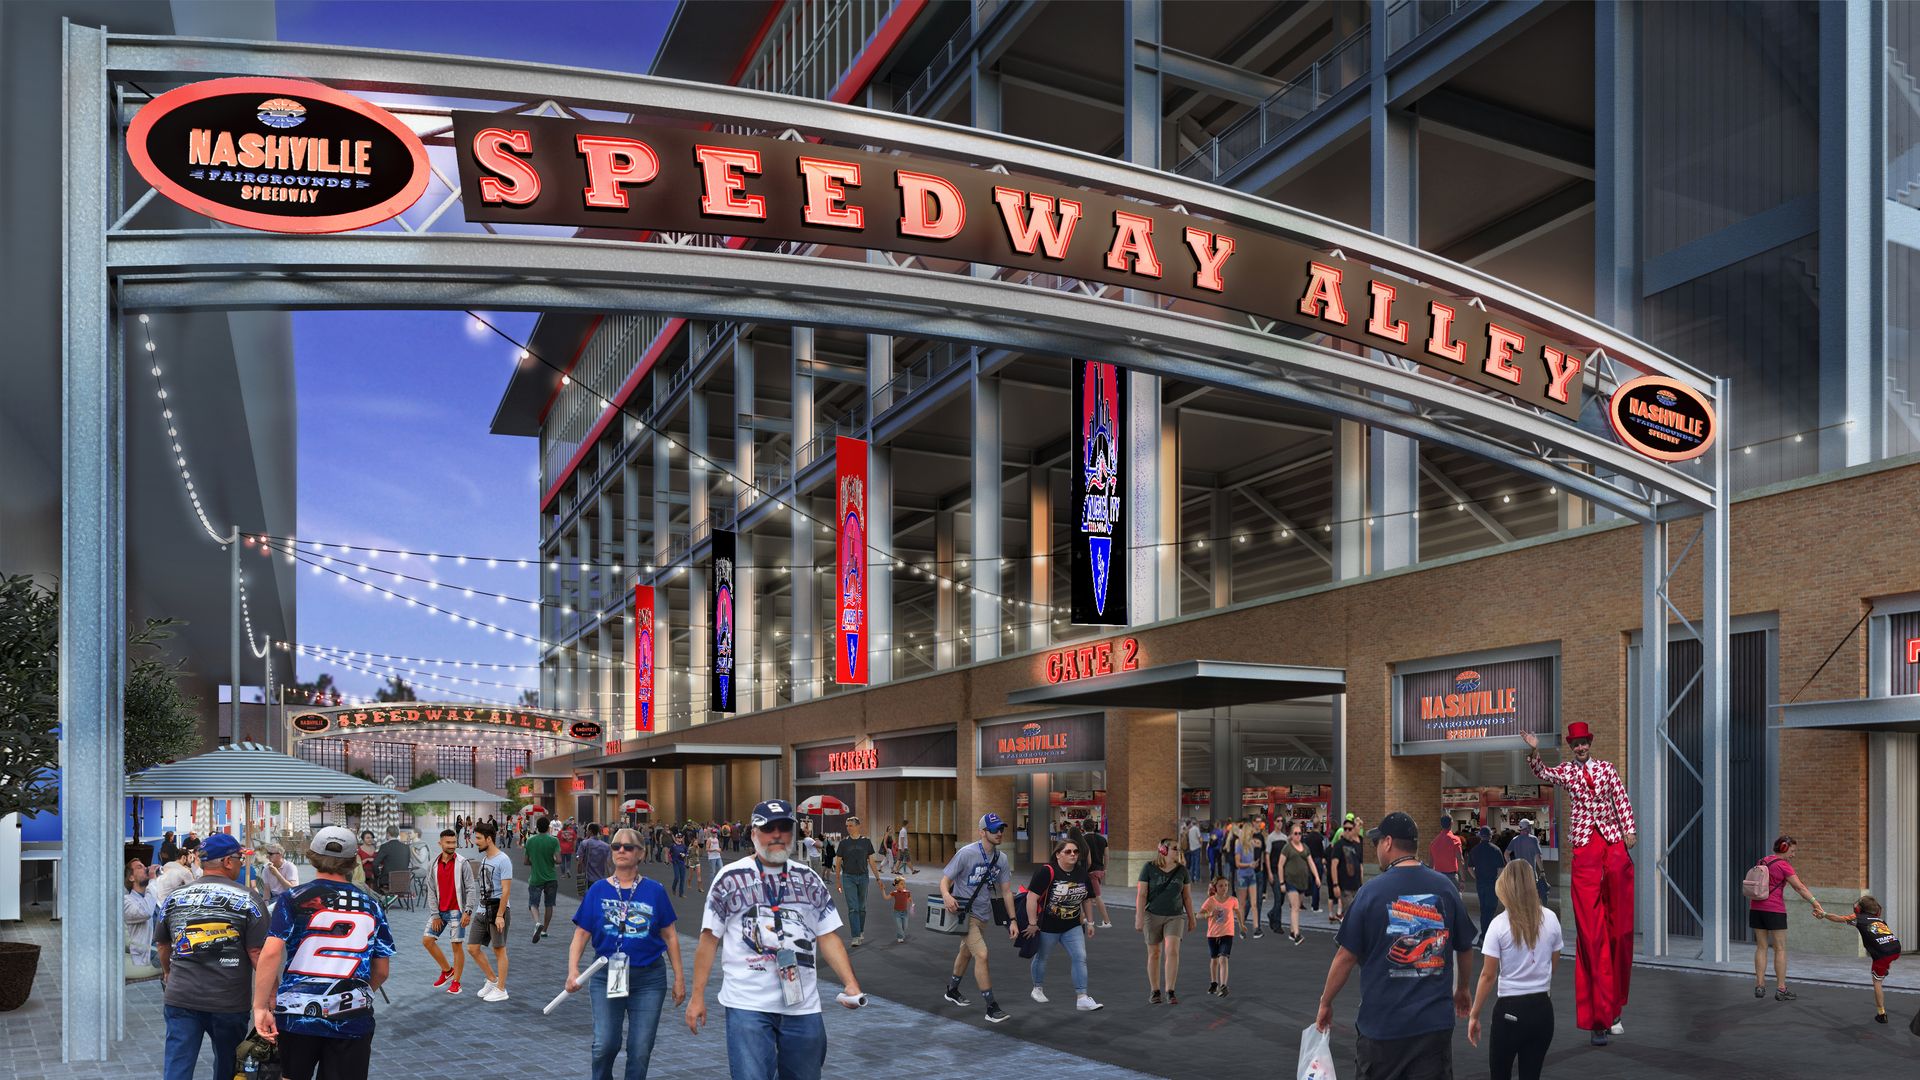 A rendering showing "speedway alley" where NASCAR fans can mingle before races at the fairgrounds.